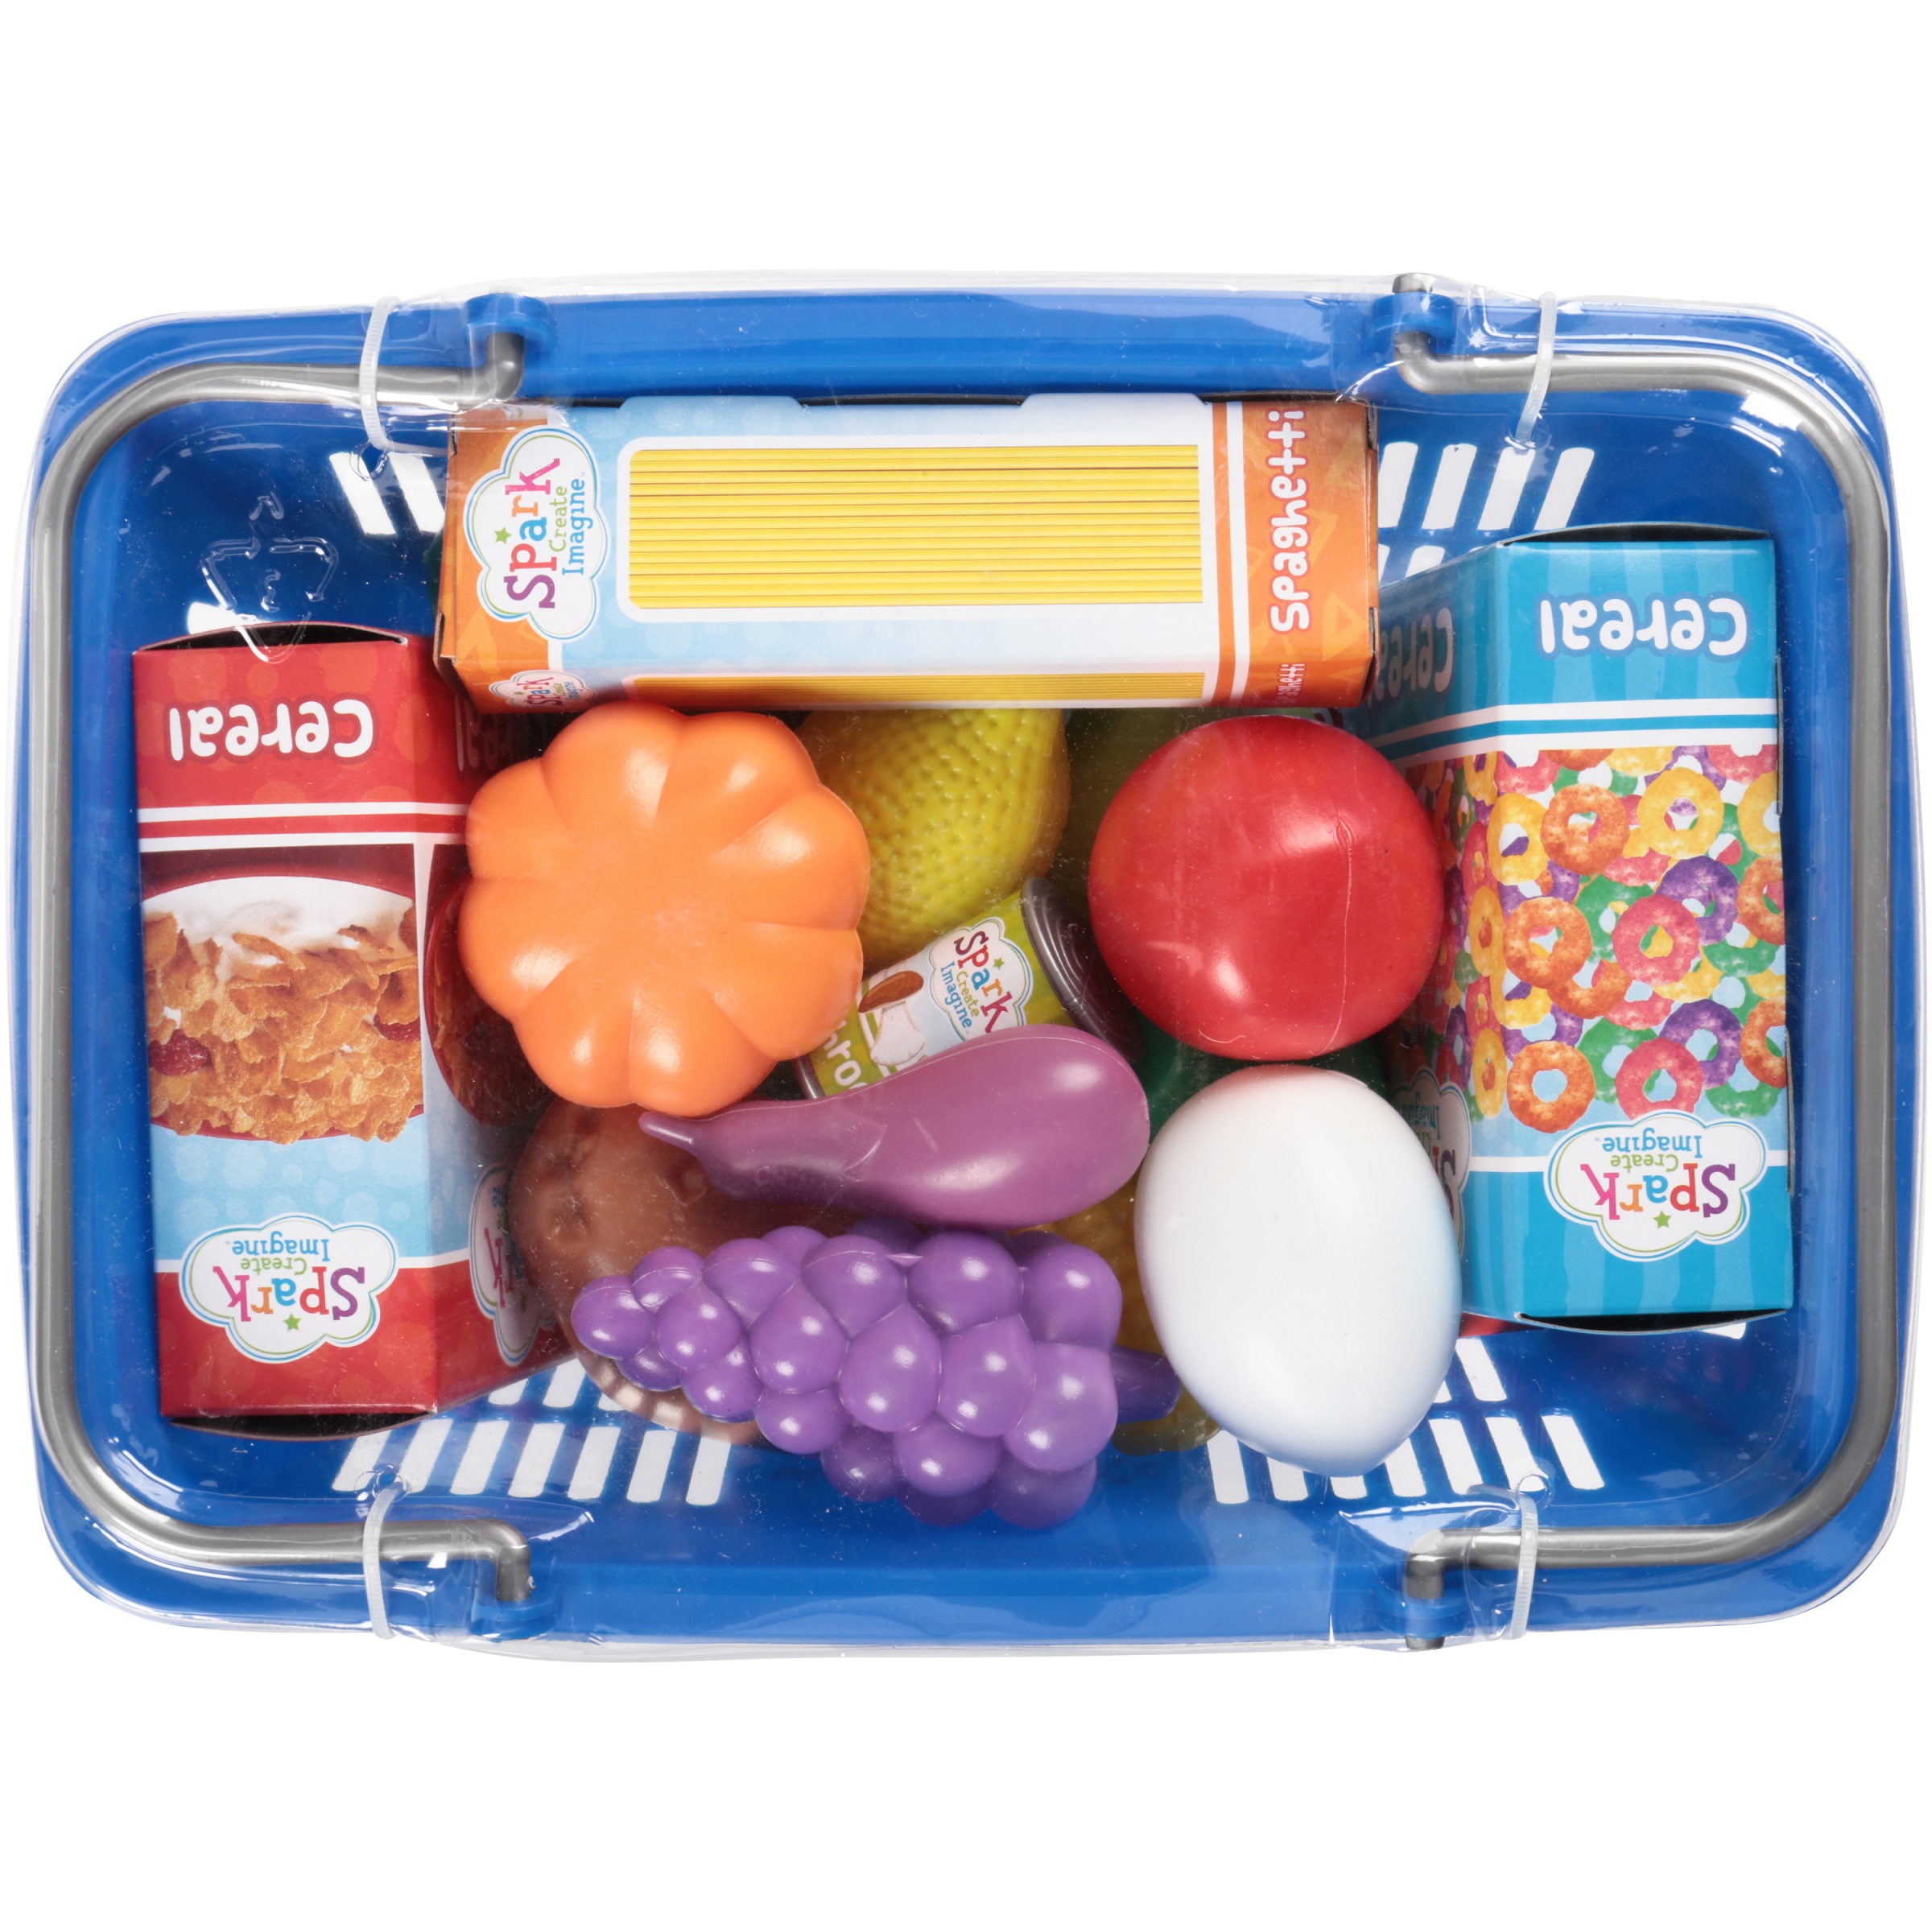 Spark Create Imagine™ Shopping Basket Play Food Set 25 pc. Pack - image 3 of 3